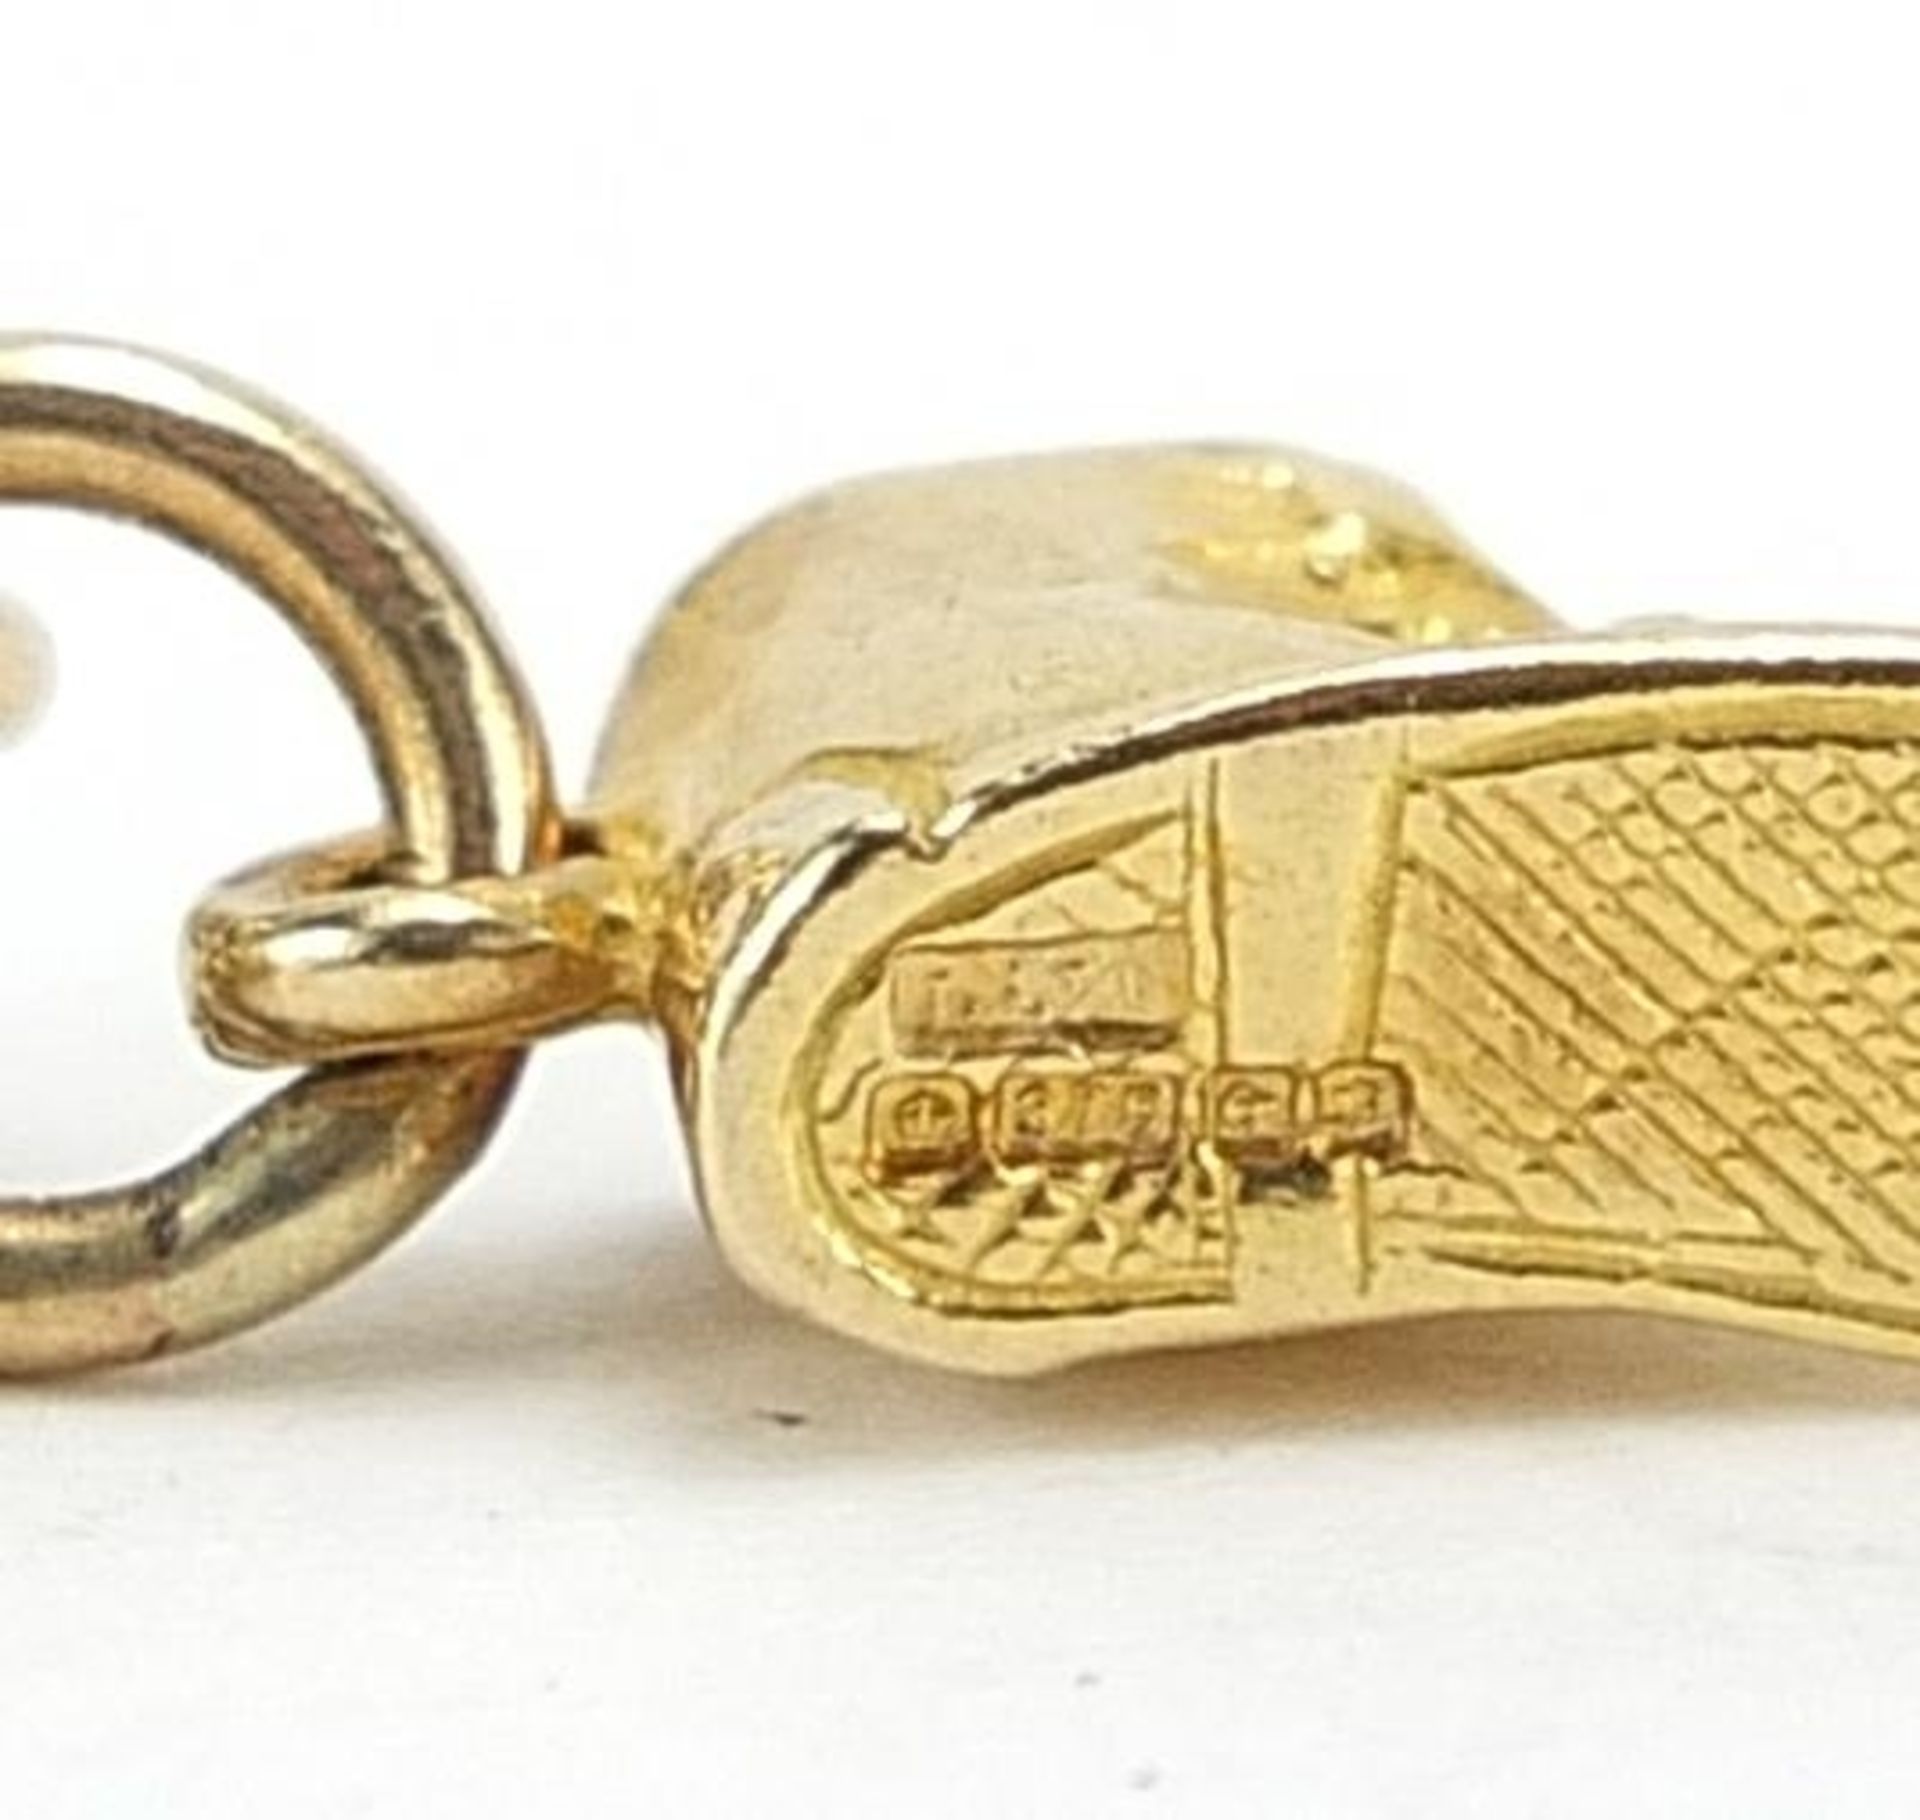 9ct gold shoes charm, 1.6cm wide, 2.3g - Image 4 of 4